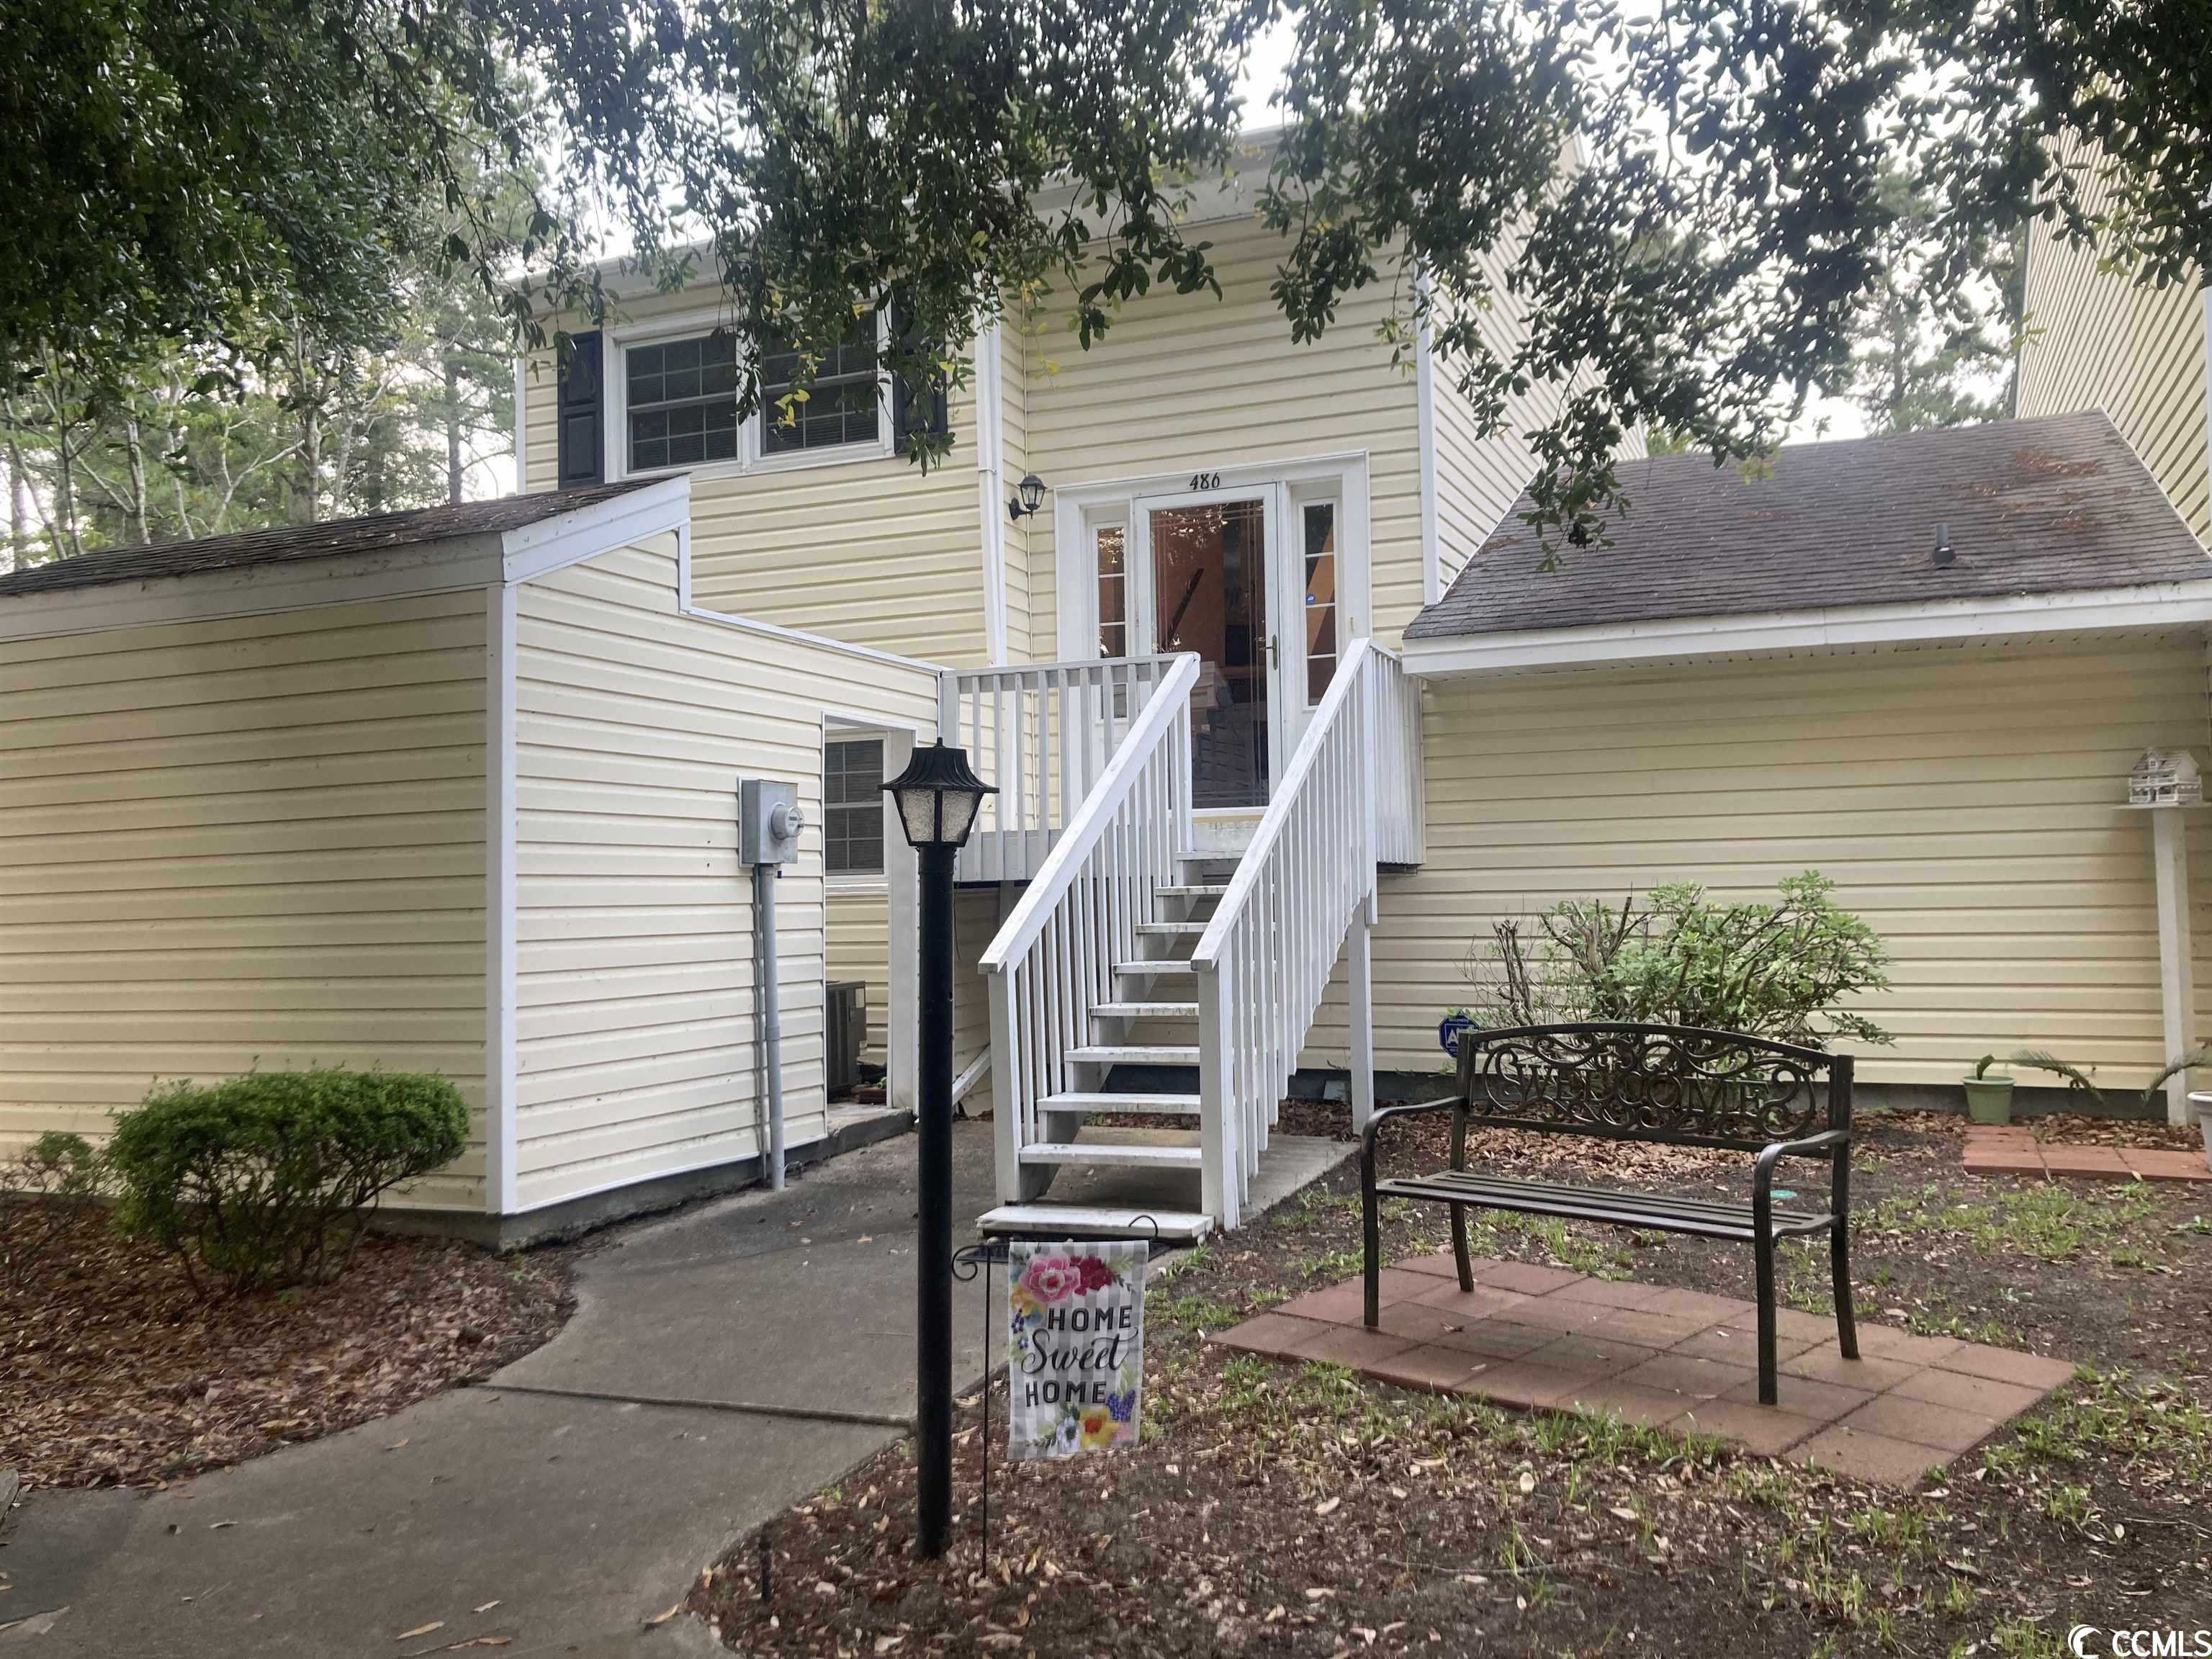 View Johnsonville, SC 29555 townhome